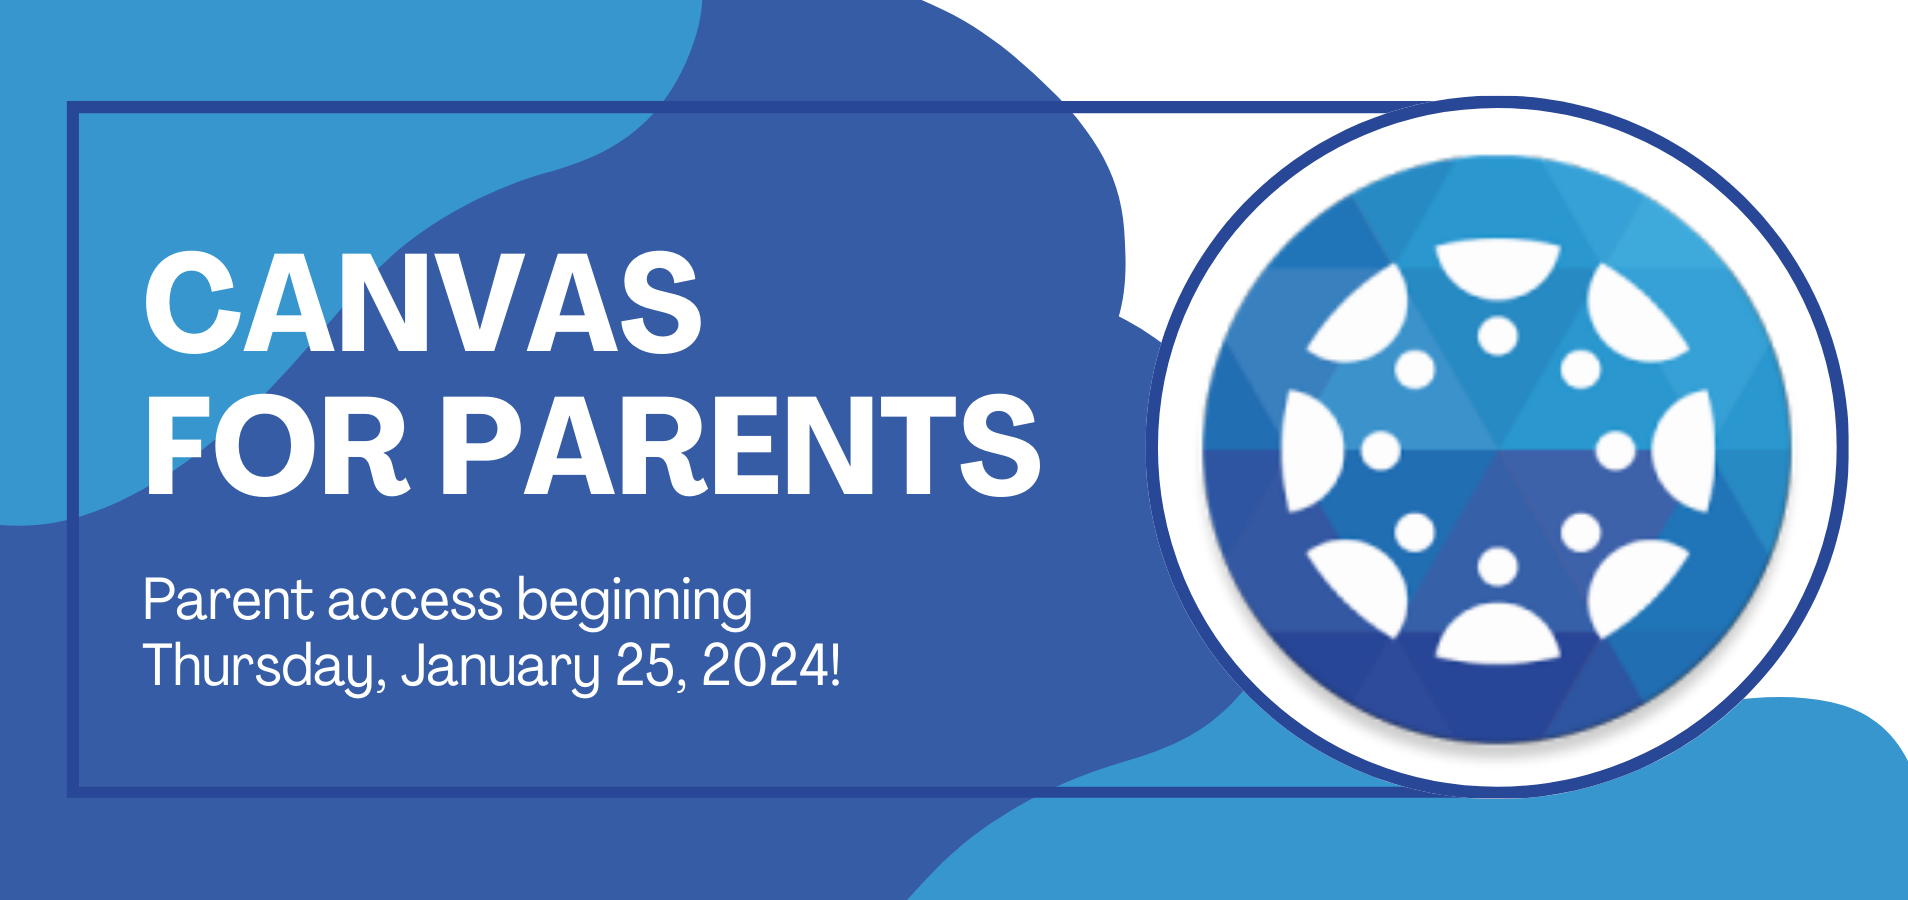 Canvas Access for Parents beginning Thursday, January 25, 2024